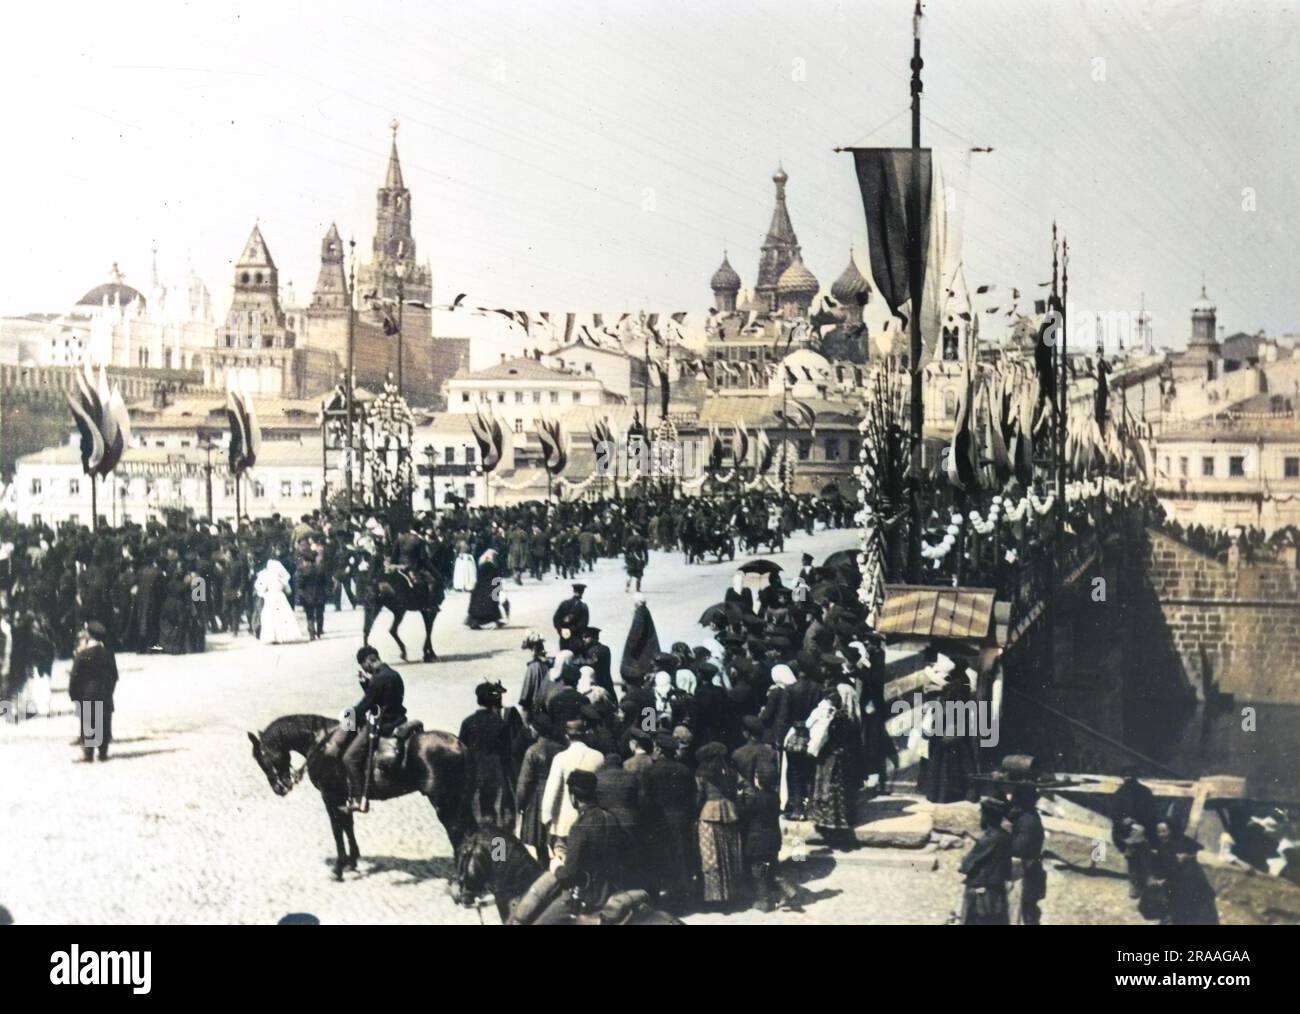 Tsar Nicholas II of Russia was crowned on the 26th of May 1896, this parade on the Kamenny Bridge in Moscow, is a small glimpse of the celebratory mood said to have captivated the Russian people.     Date: 26th May 1896 Stock Photo